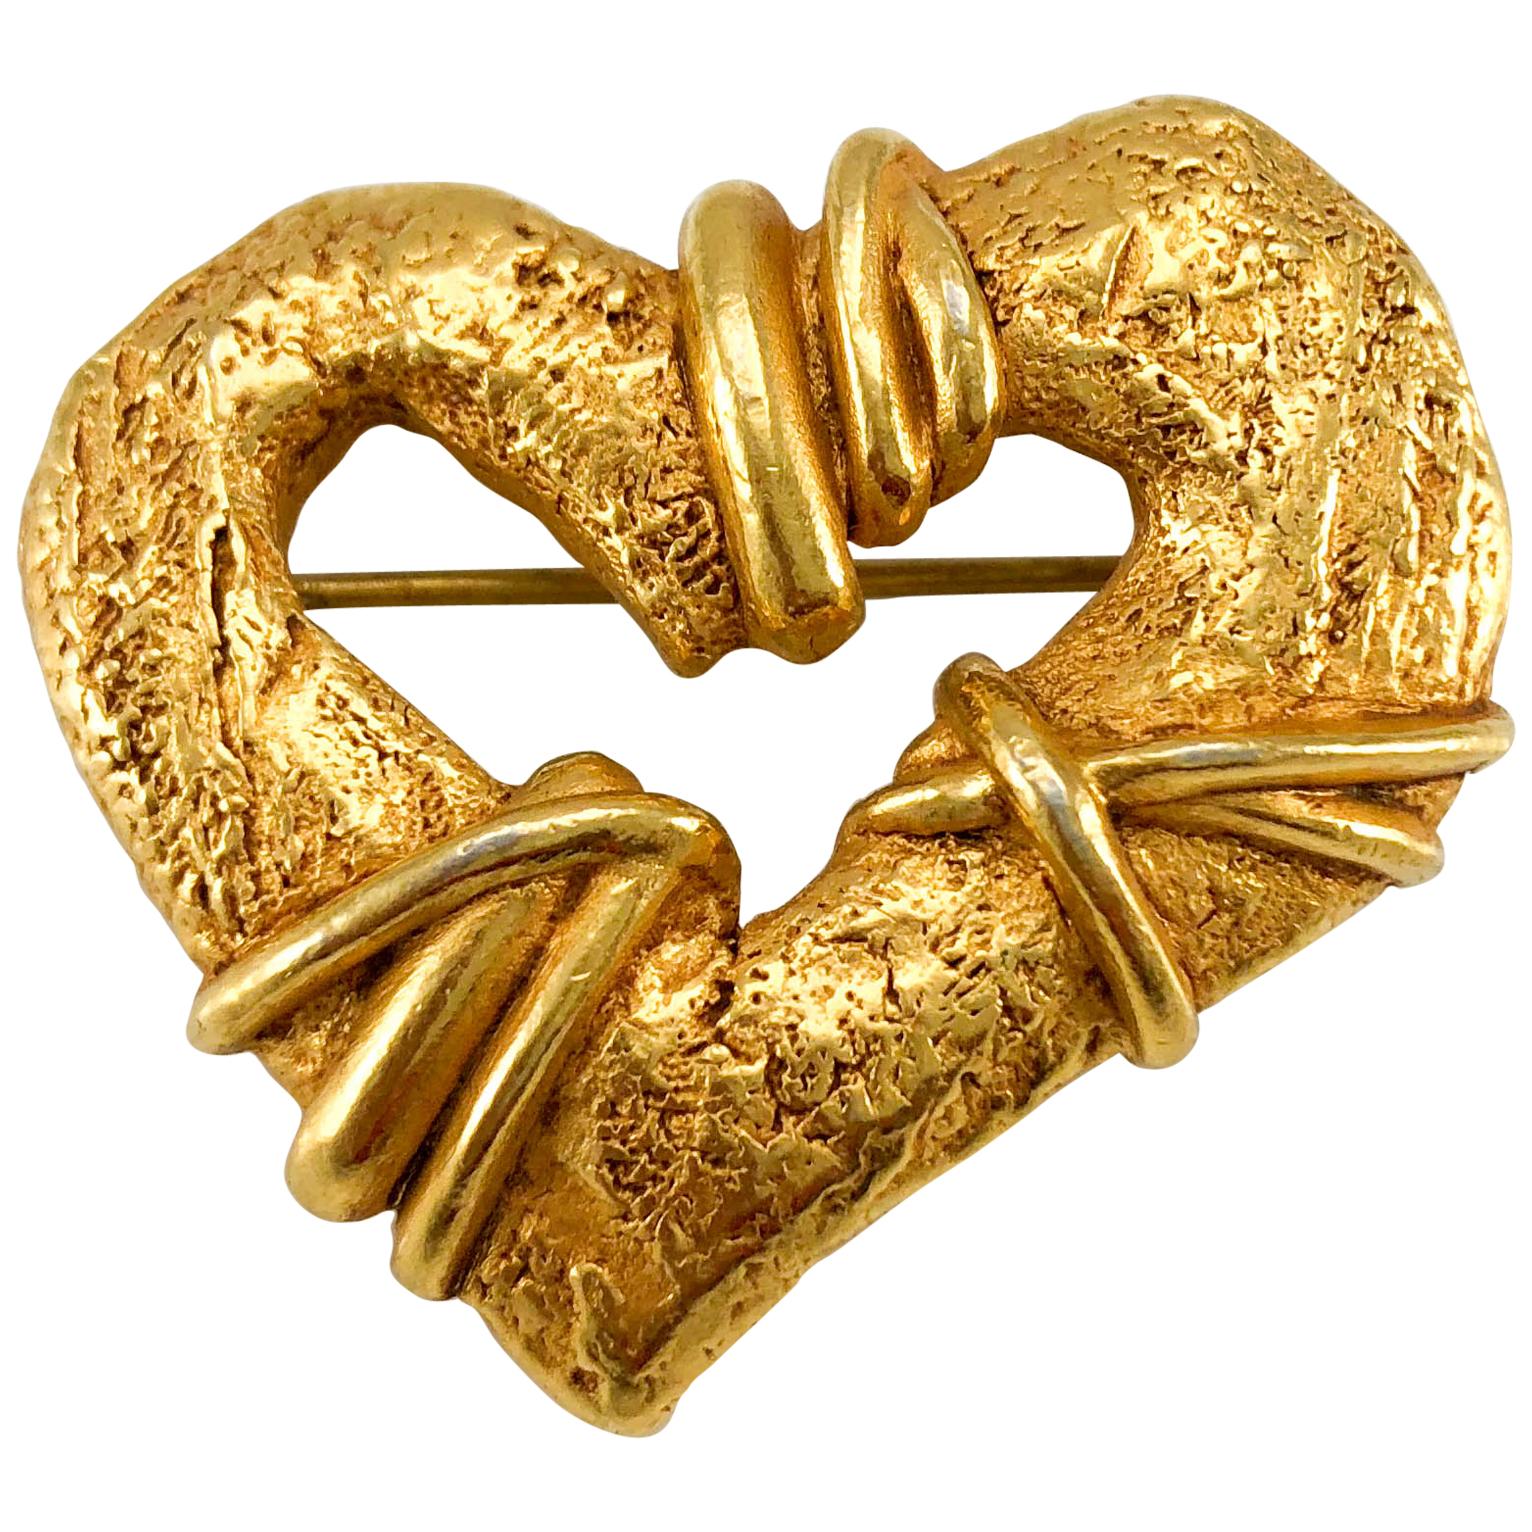 1994 Christian Lacroix Gold-Plated Heart Brooch, by Robert Goossens For Sale